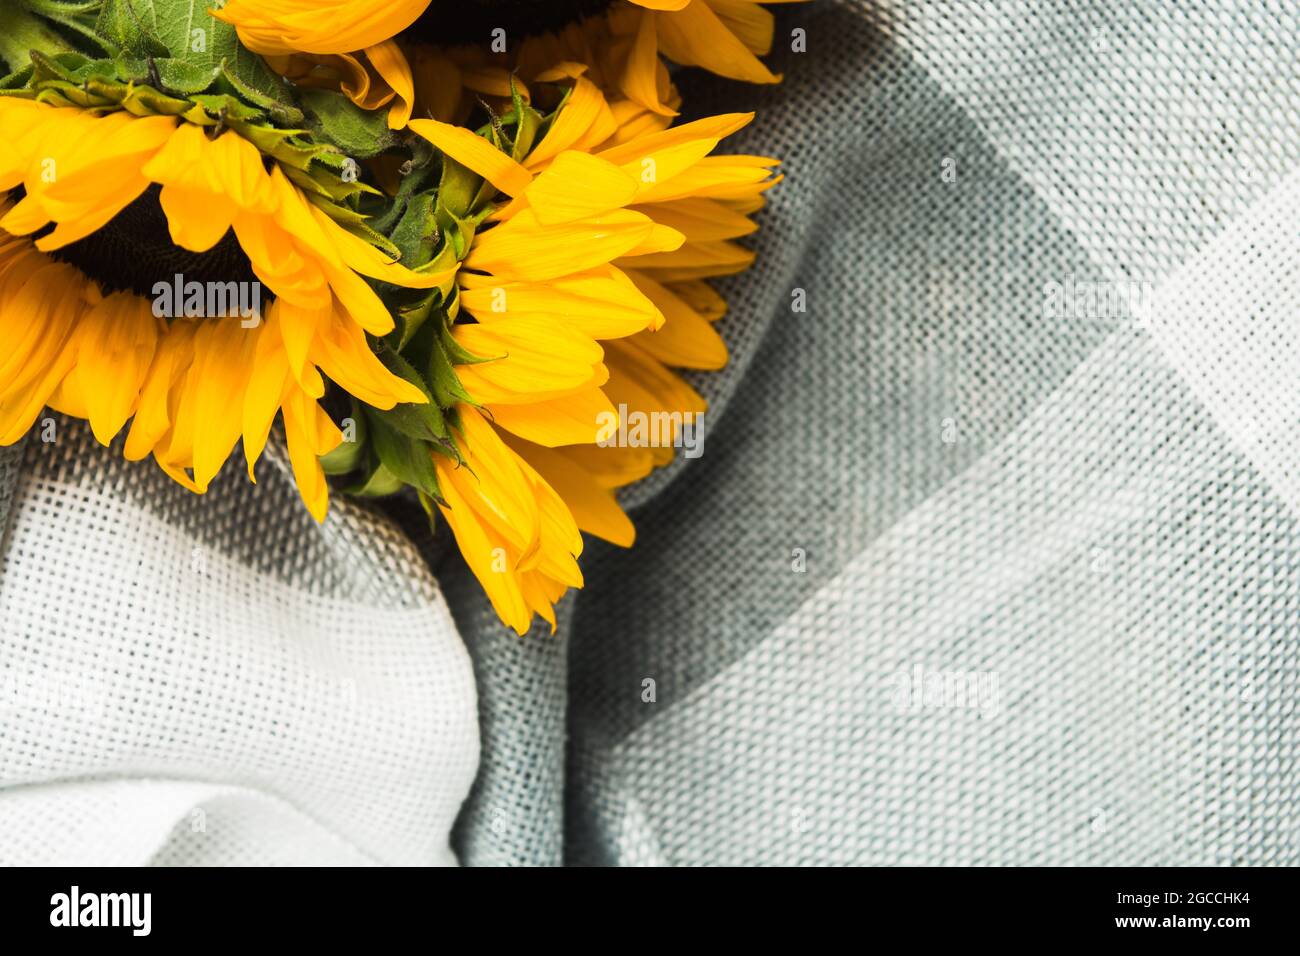 Beautiful bouquet of authentic yellow sunflowers on grey plaid. Closeup view Stock Photo